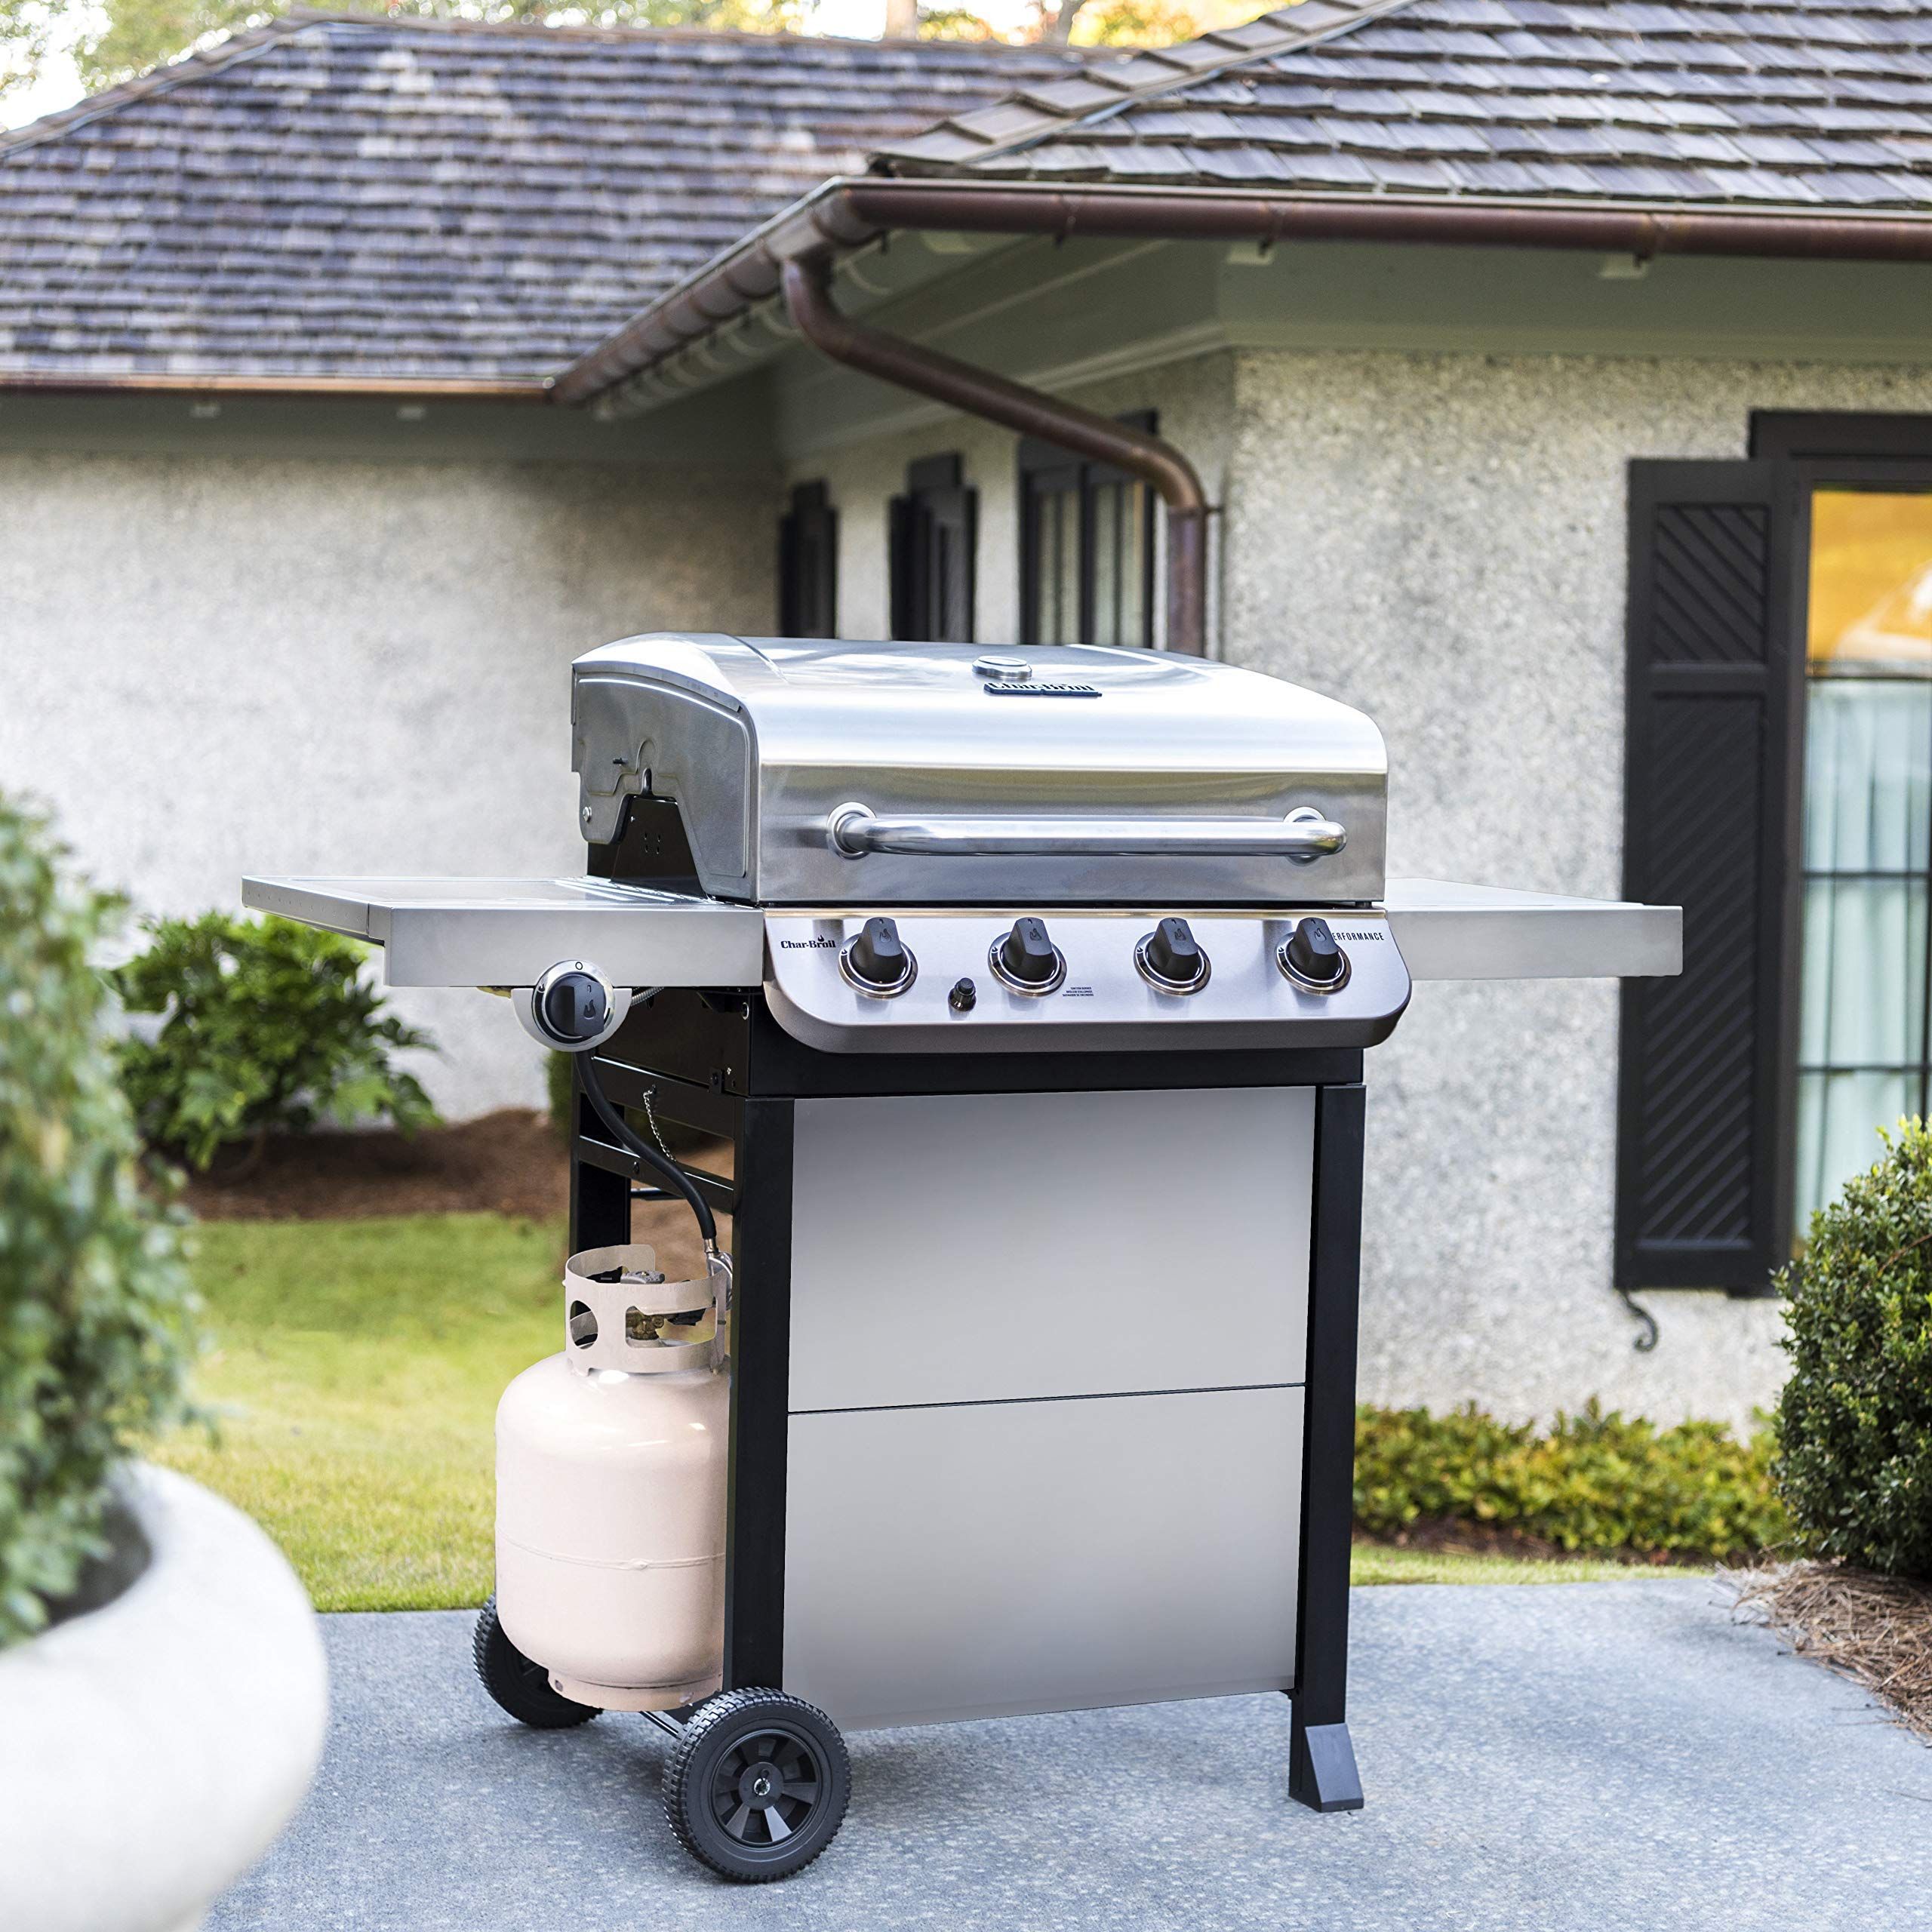 Char-Broil 463377319 Performance 4-Burner Cart Style Liquid Propane Gas Grill, Stainless Steel | Amazon (US)